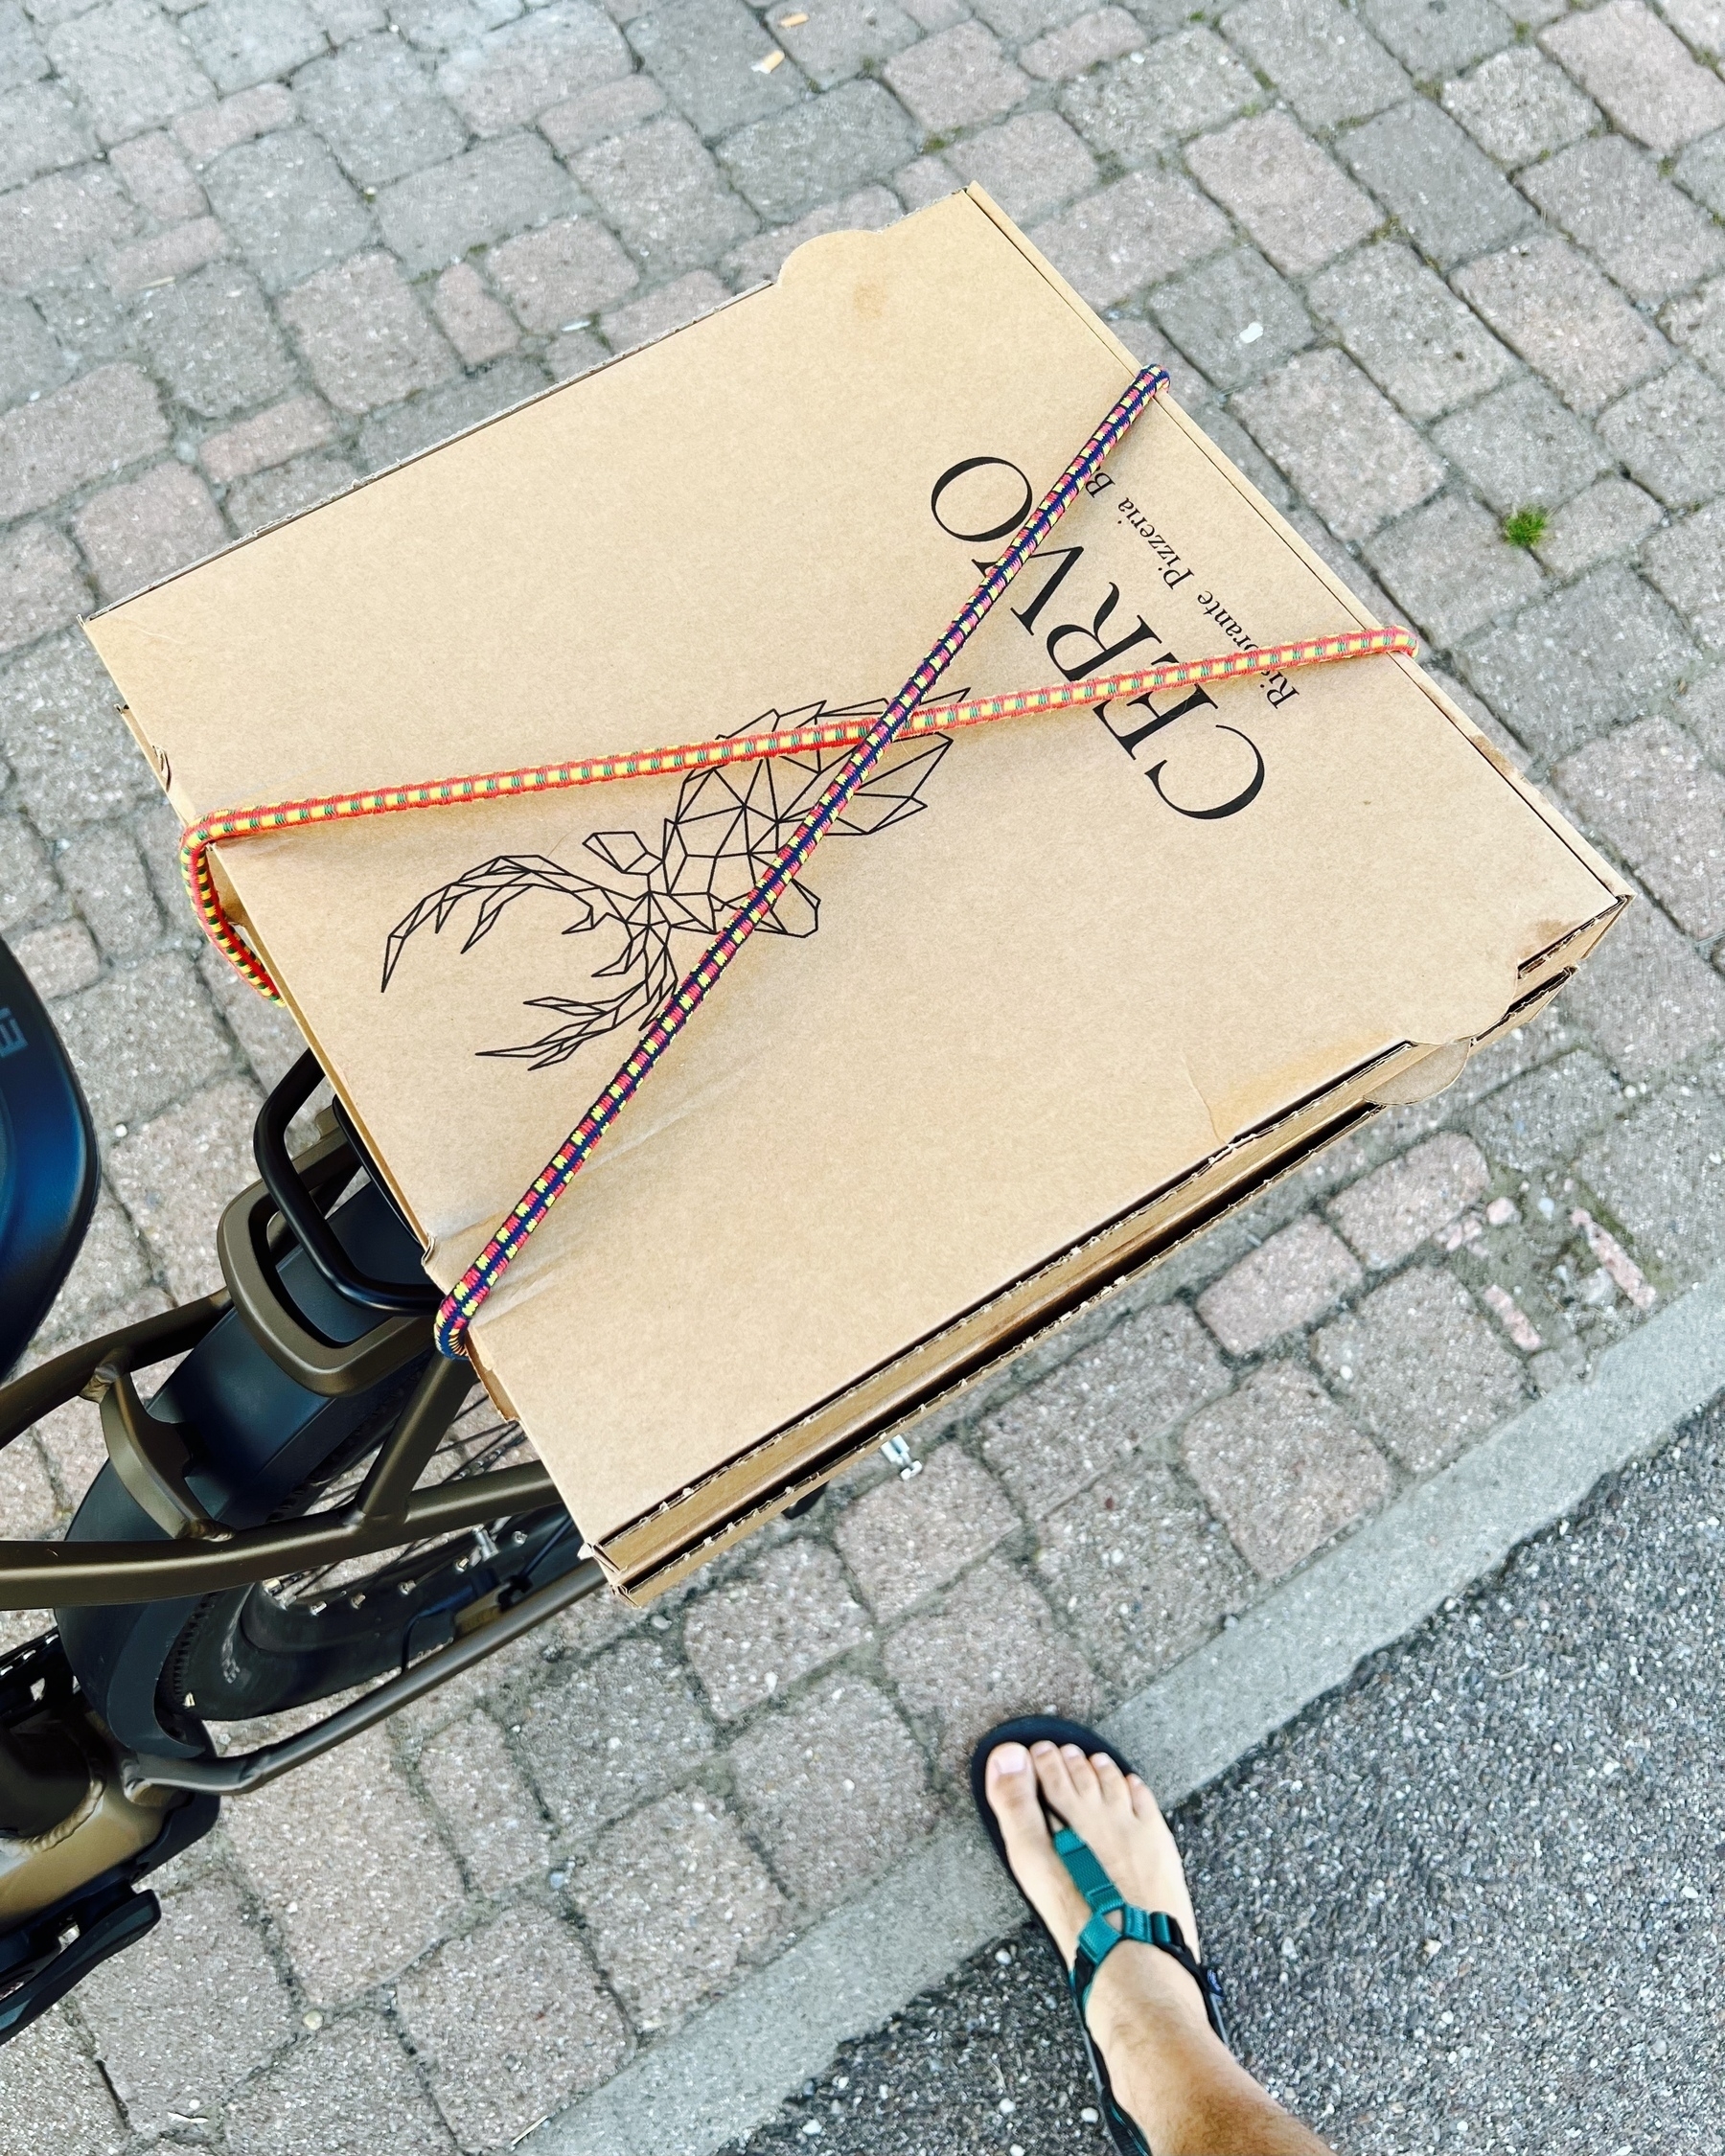 Two brown pizza boxes with a very simple design strapped to the rear rack of a bronze e-bike with elastic bands. at the bottom of the frame a right foot in sandals is partly visible.